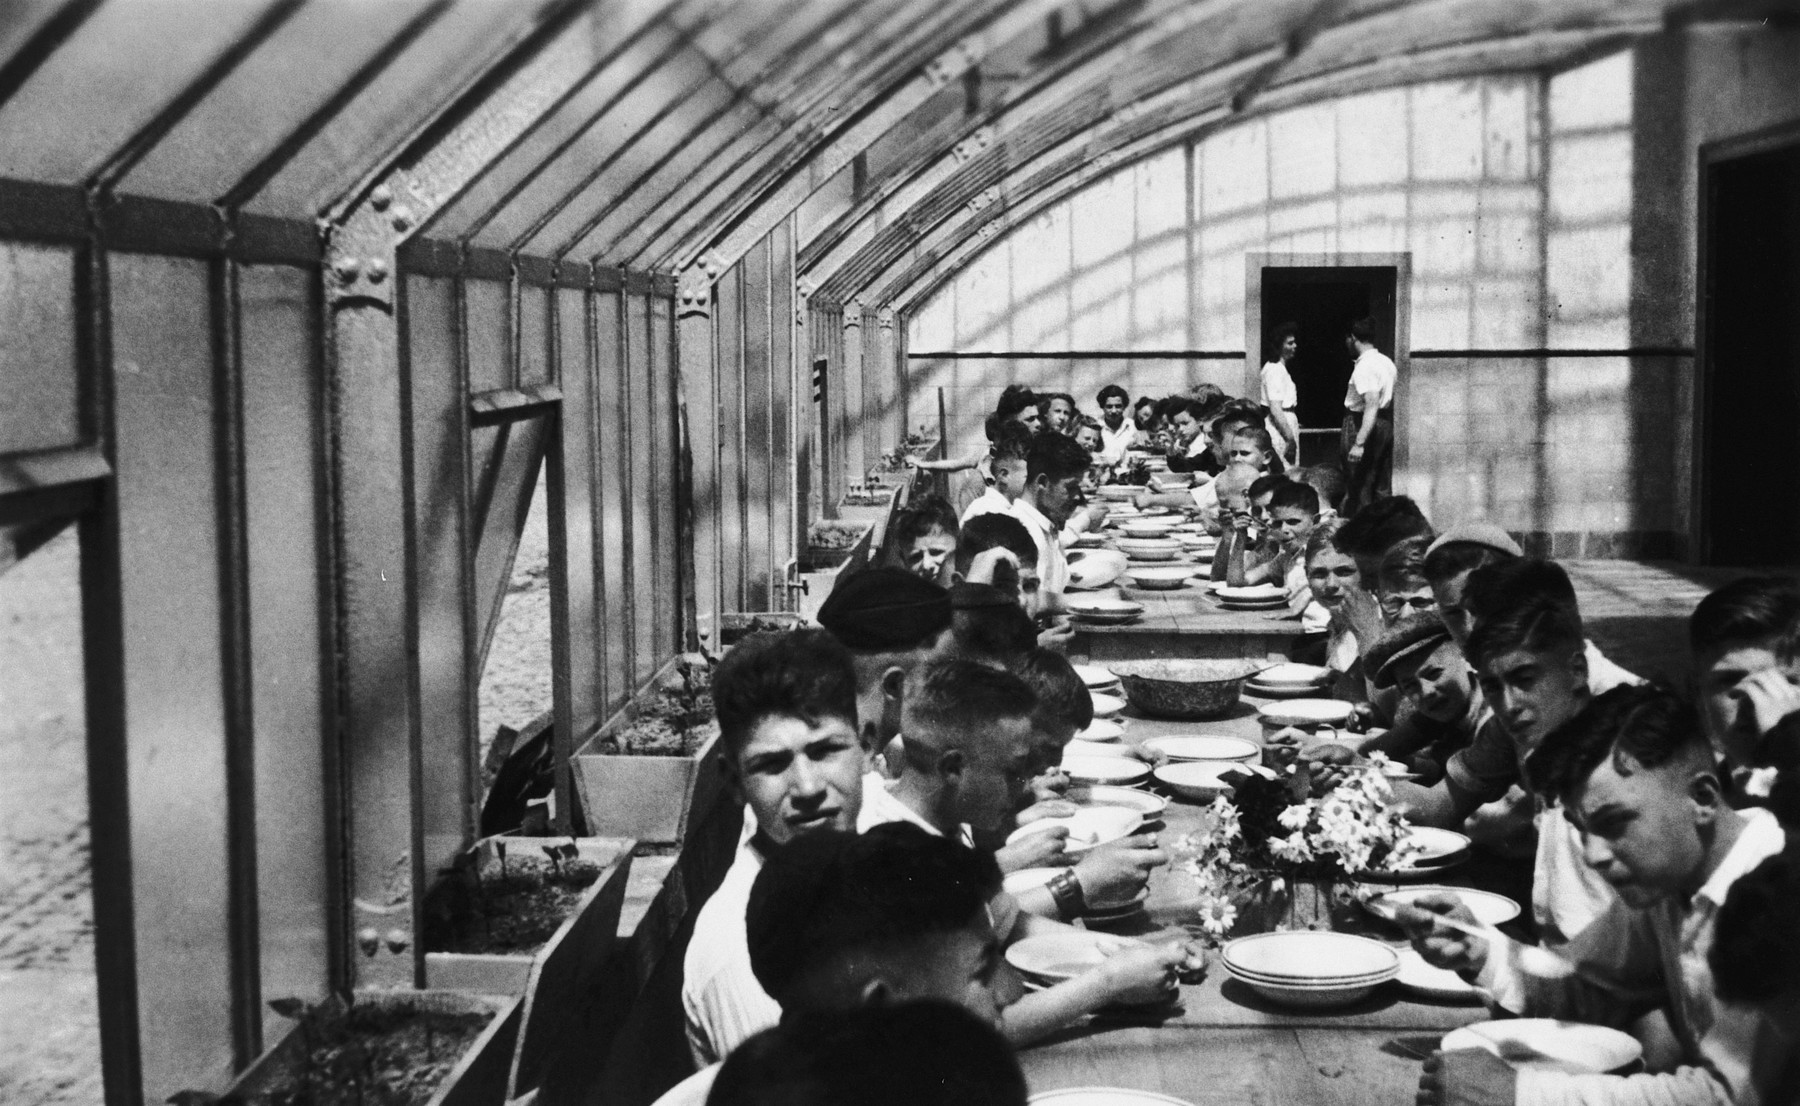 Jewish children eat a meal in the dining room of the children's home in Aische-en-Refail.

Hirsch Grunstein is fourth from the right in a cap.